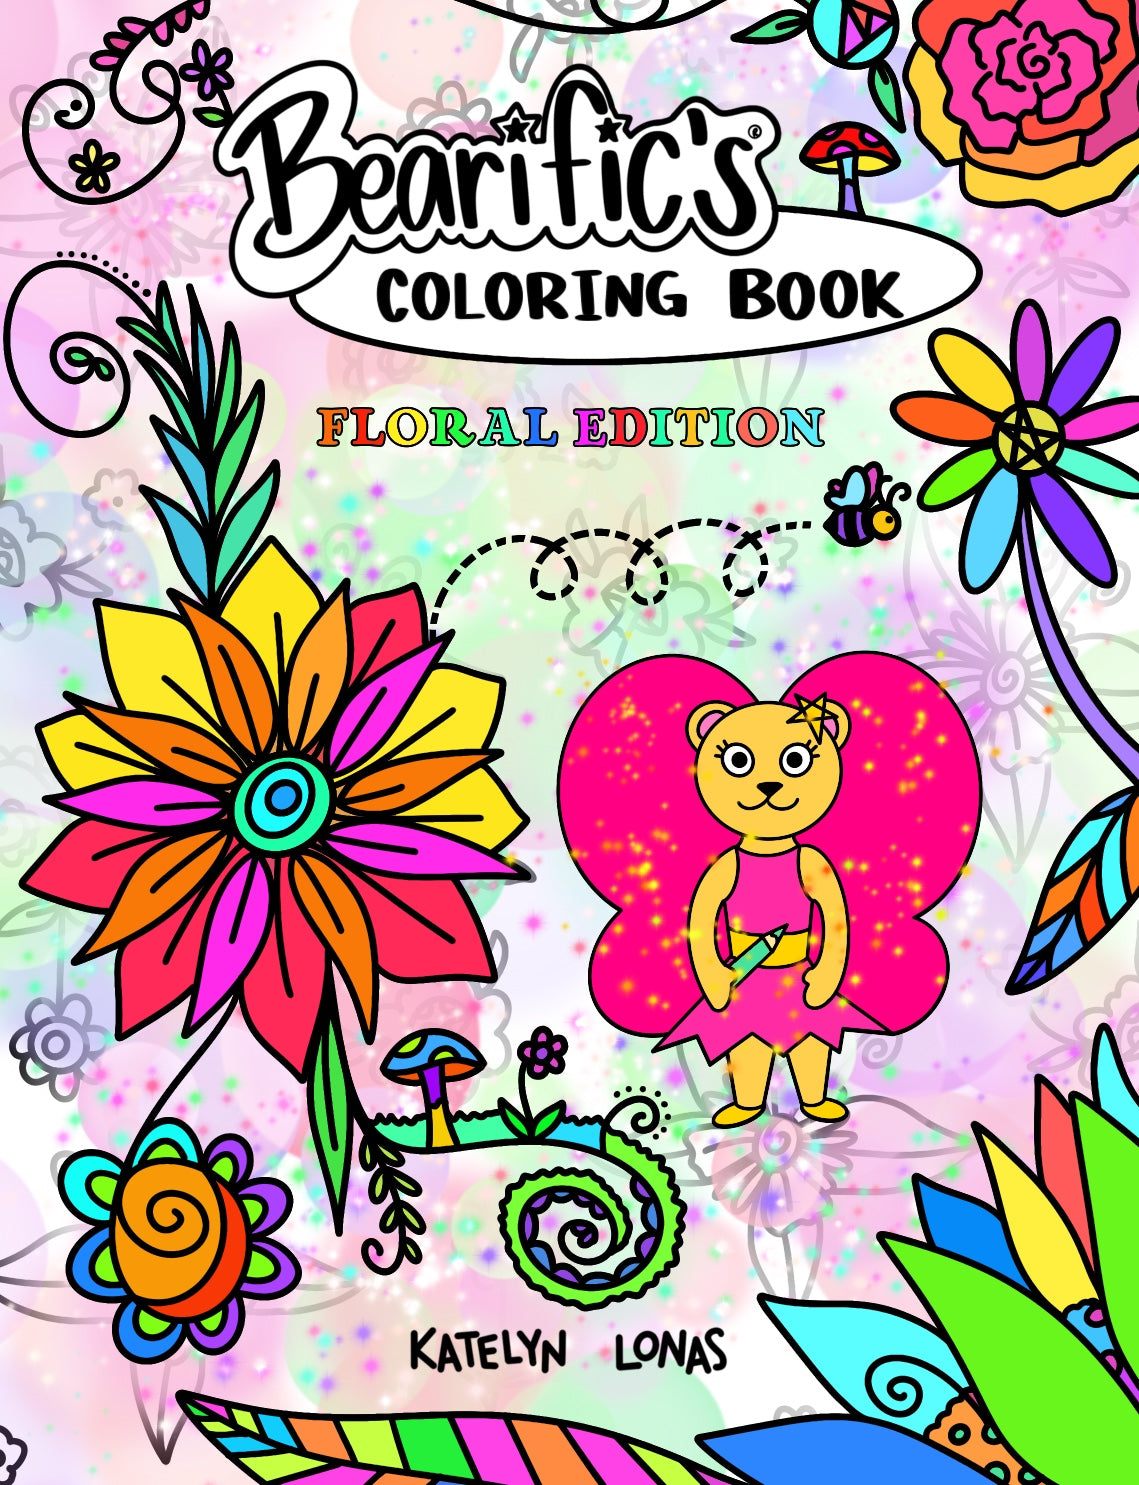 Bearific’s Coloring Book: Floral Edition